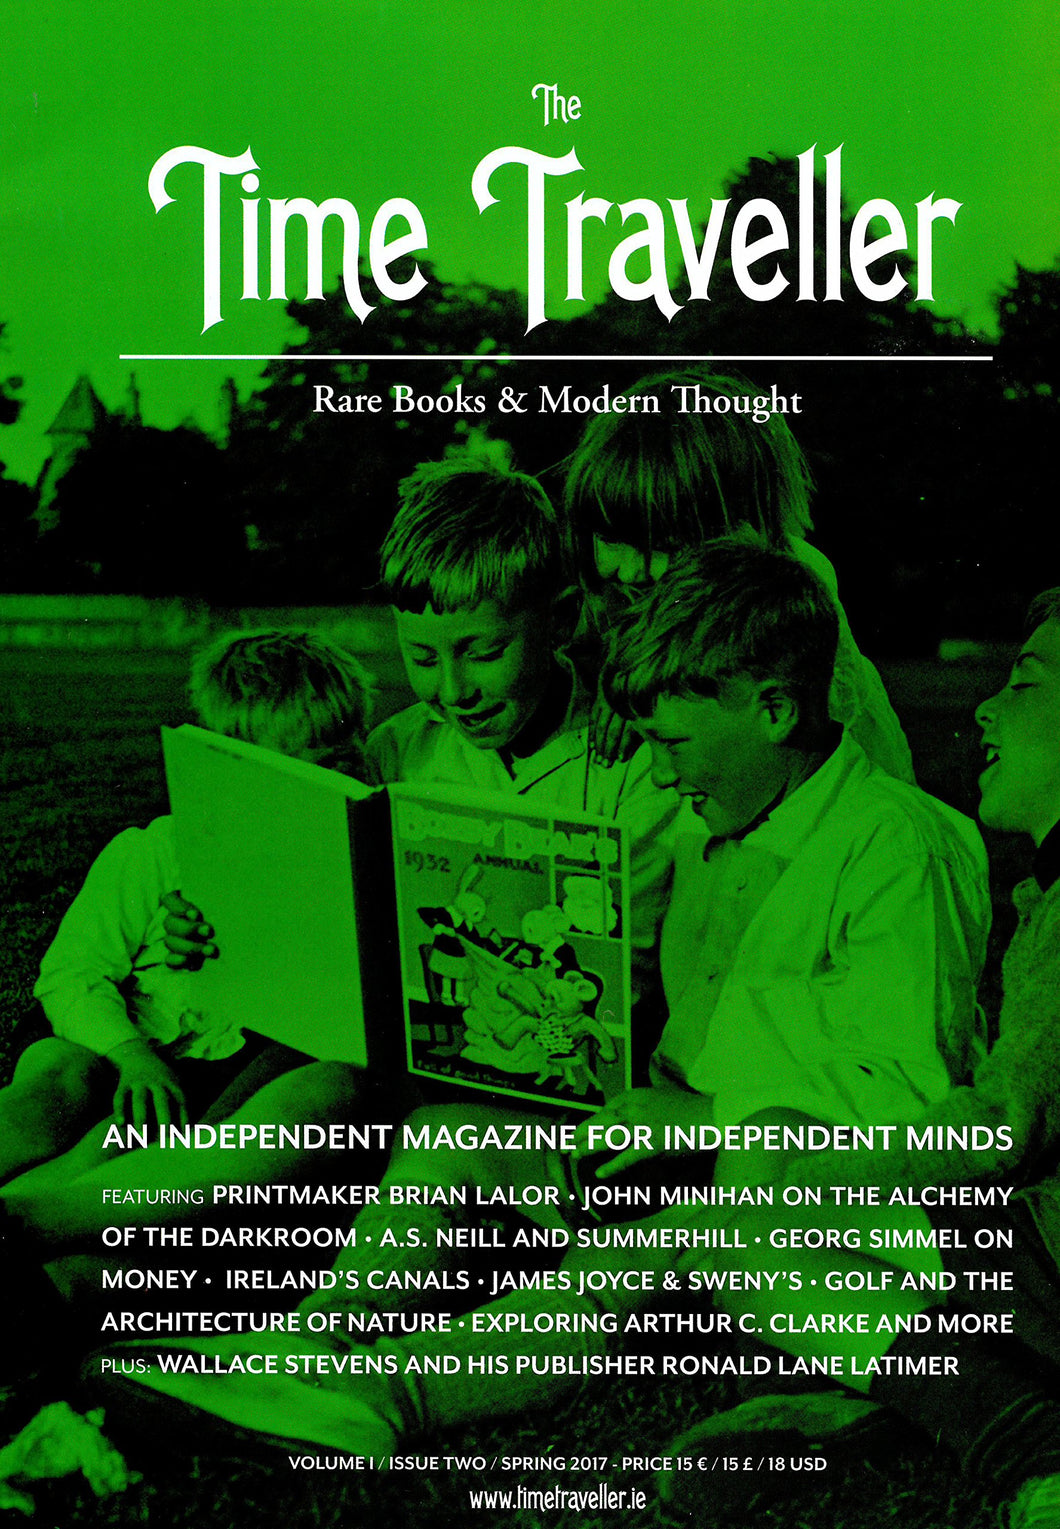 The Time Traveller: Rare Books and Modern Thought - An Independent Magazine for Independent Minds. Volume 1, issue 2 - Spring 2017